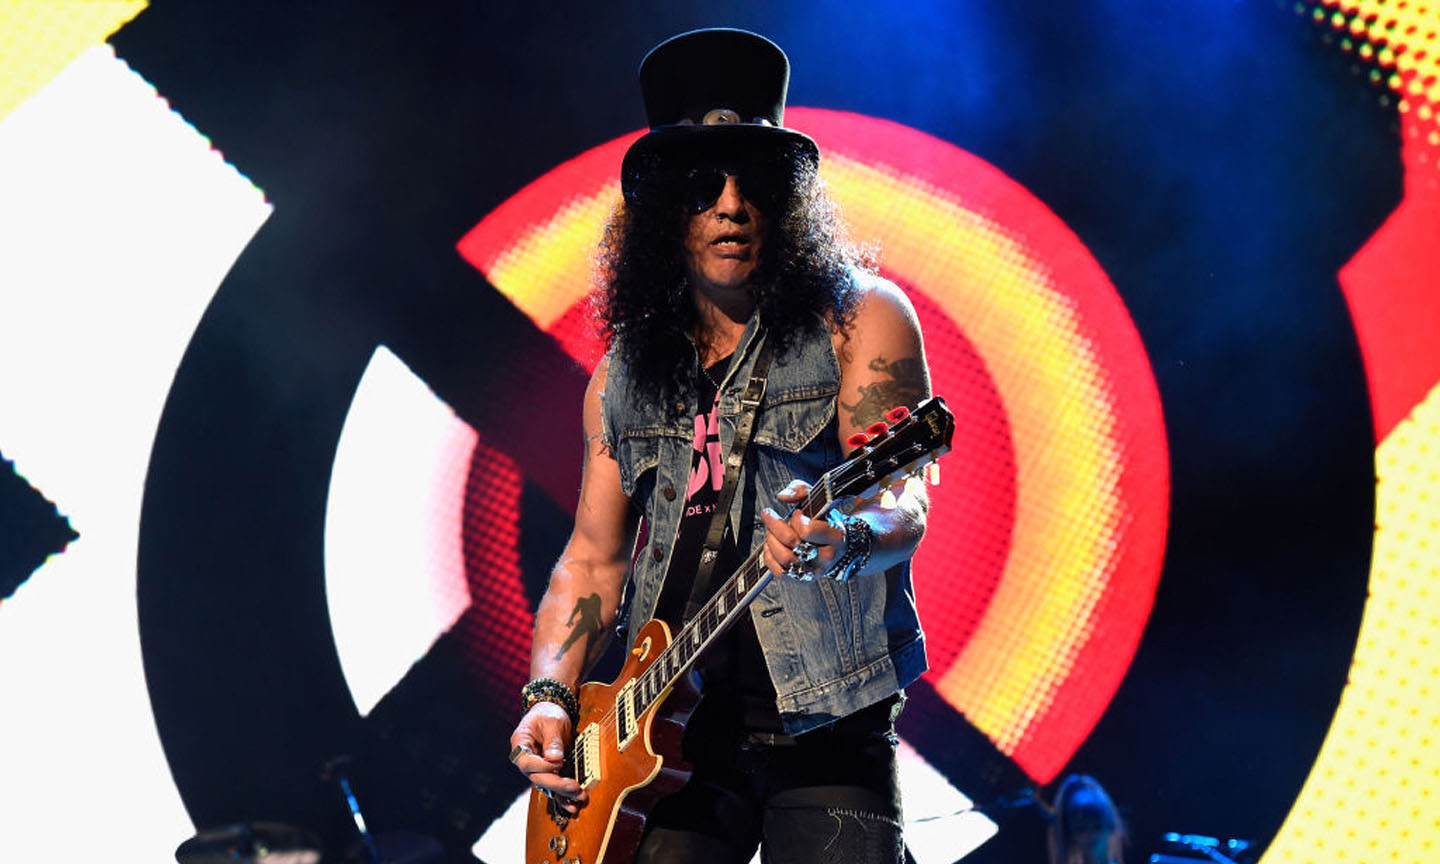 New Slash Book The Collection Slash Due In January